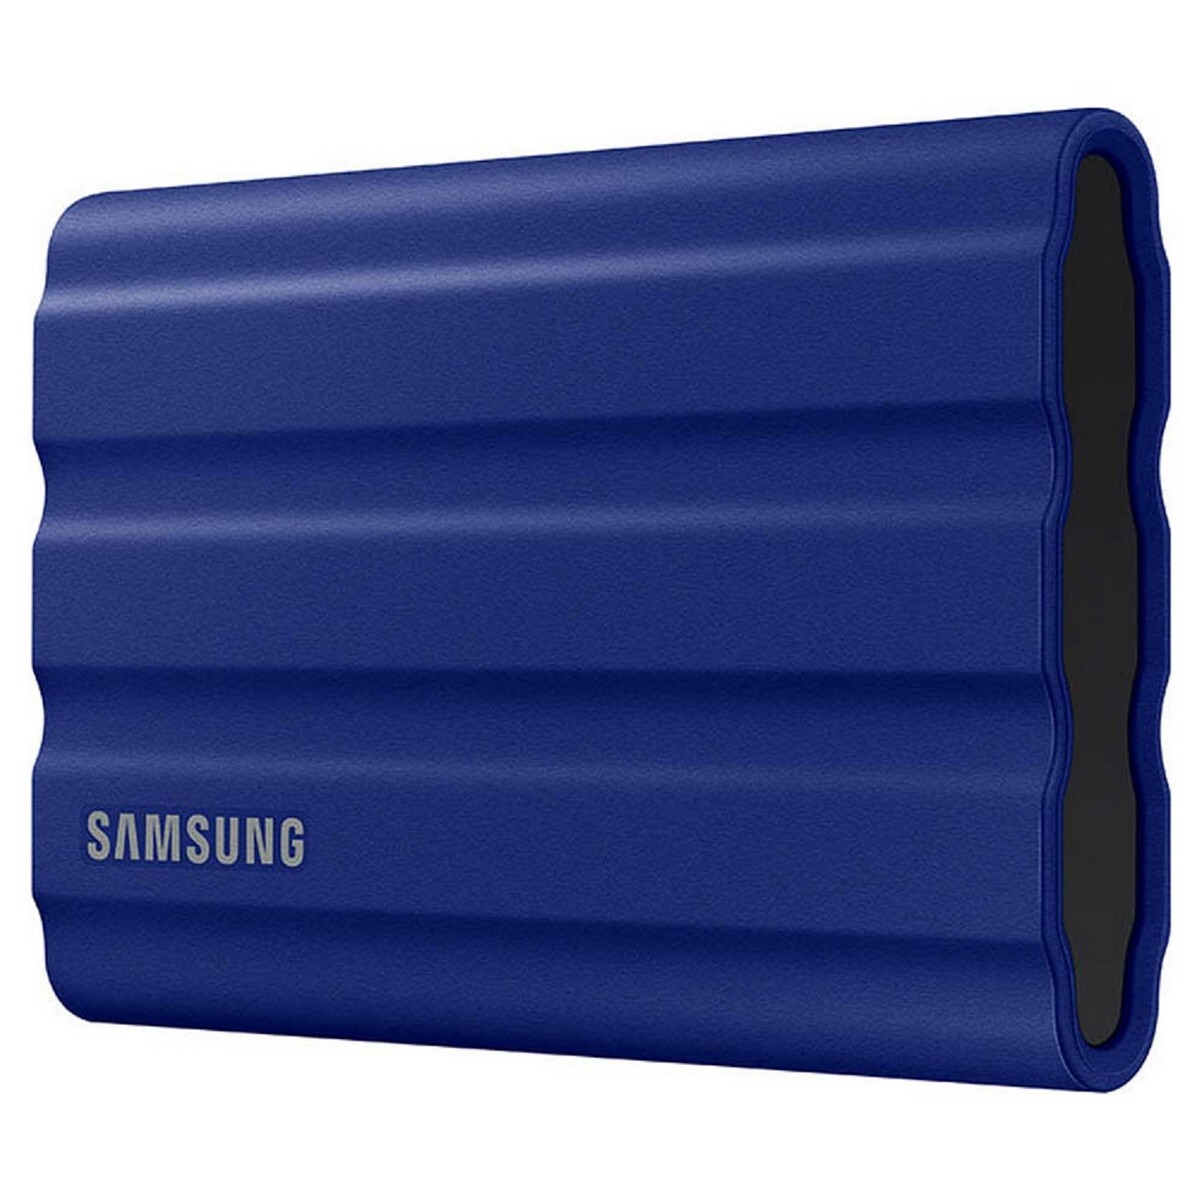 Samsung 1 TB T7 Shield Portable Solid State Drive Blue